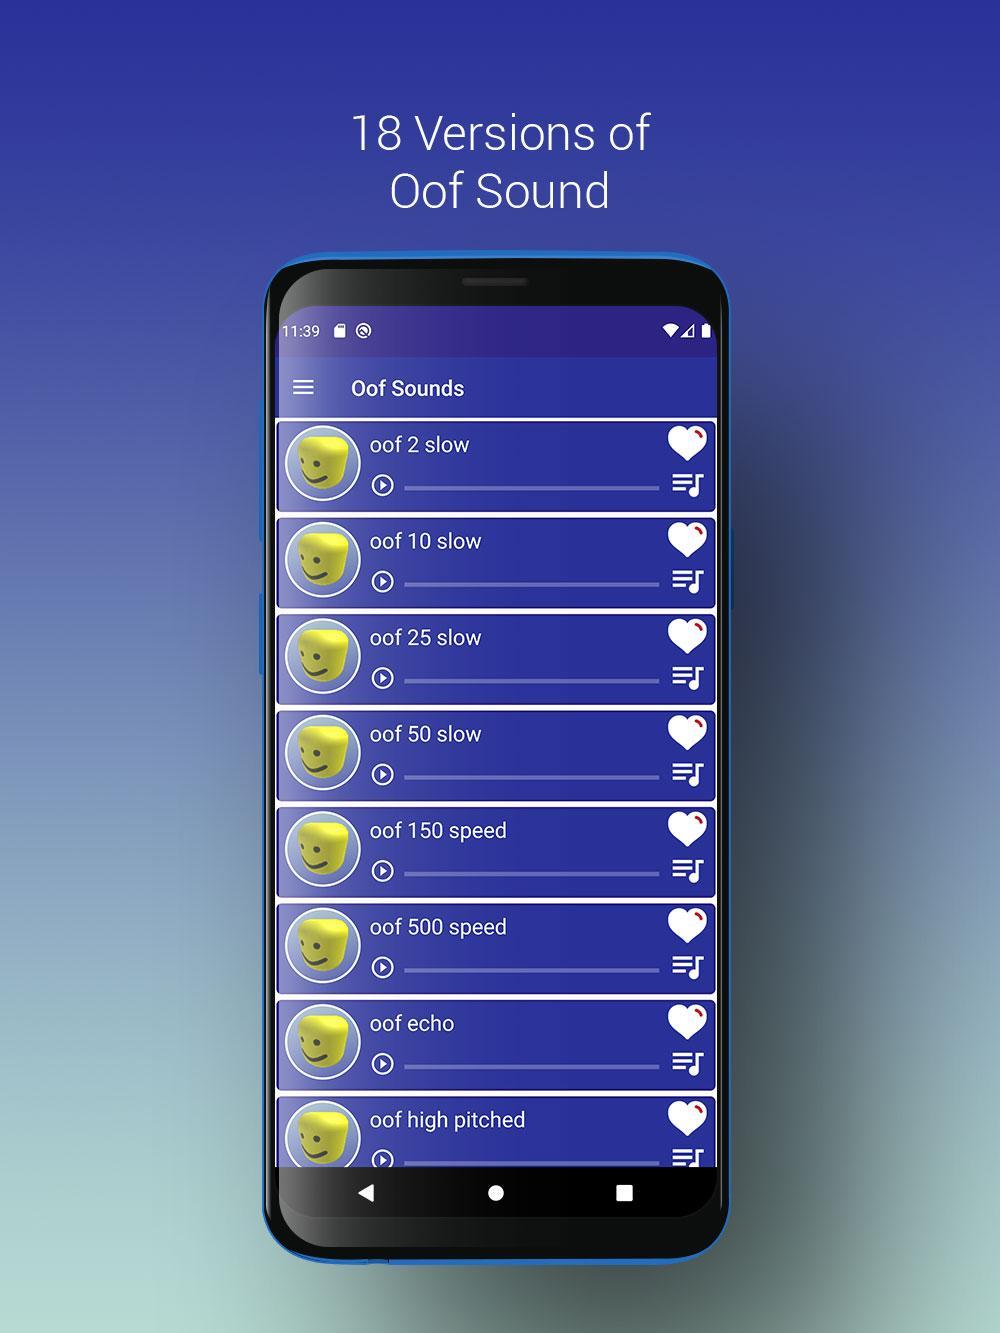 Roblox Oof Soundboard For Android Apk Download - oof roblox soundboard 10 android descargar apk